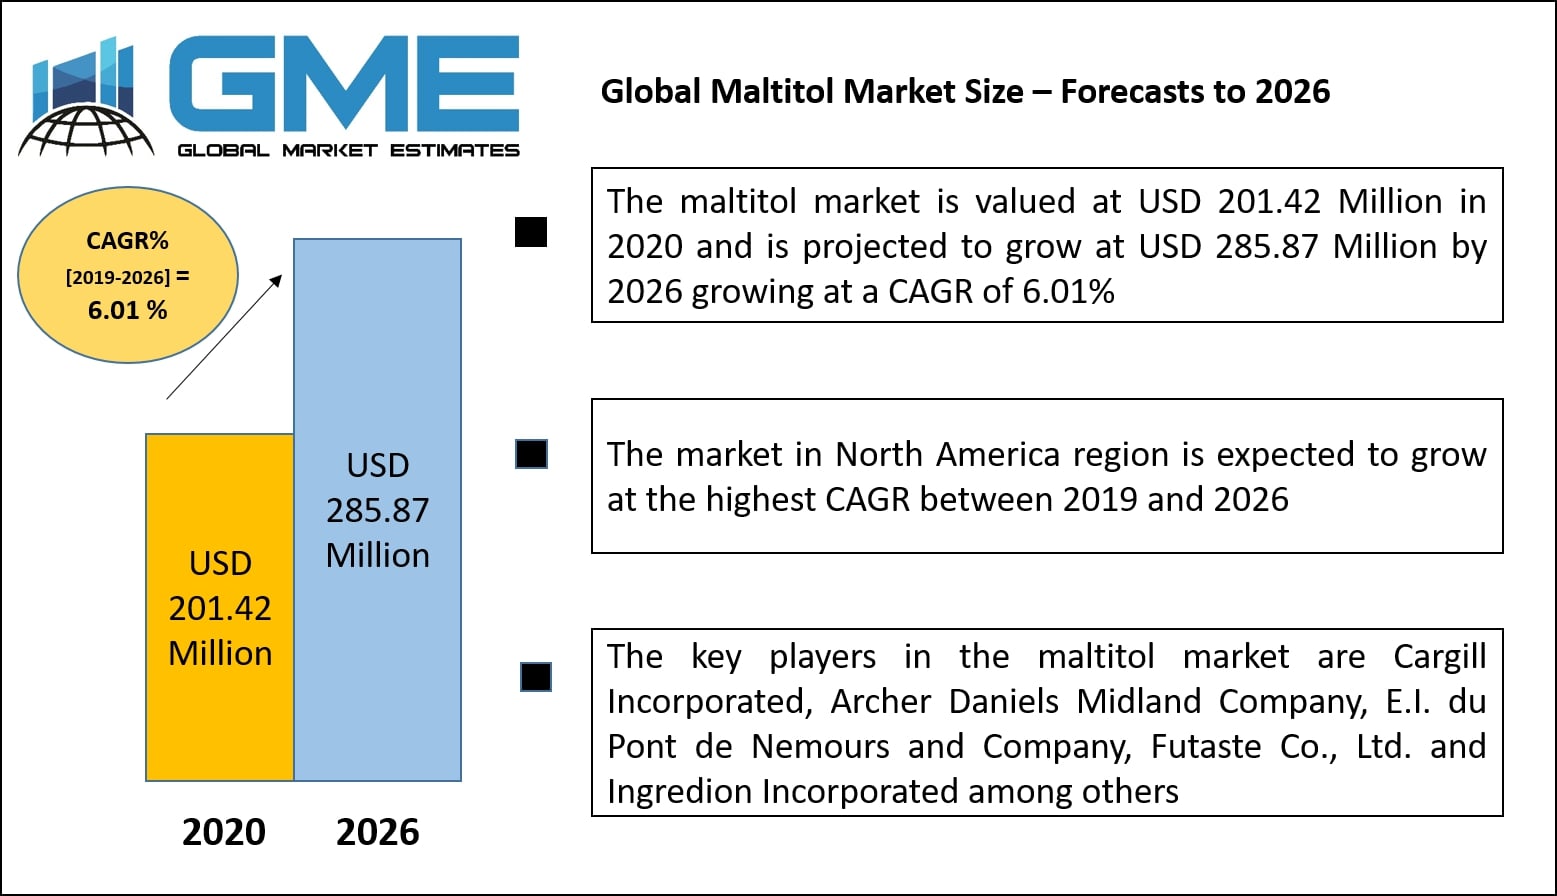 Global Maltitol Market Size – Forecasts to 2026